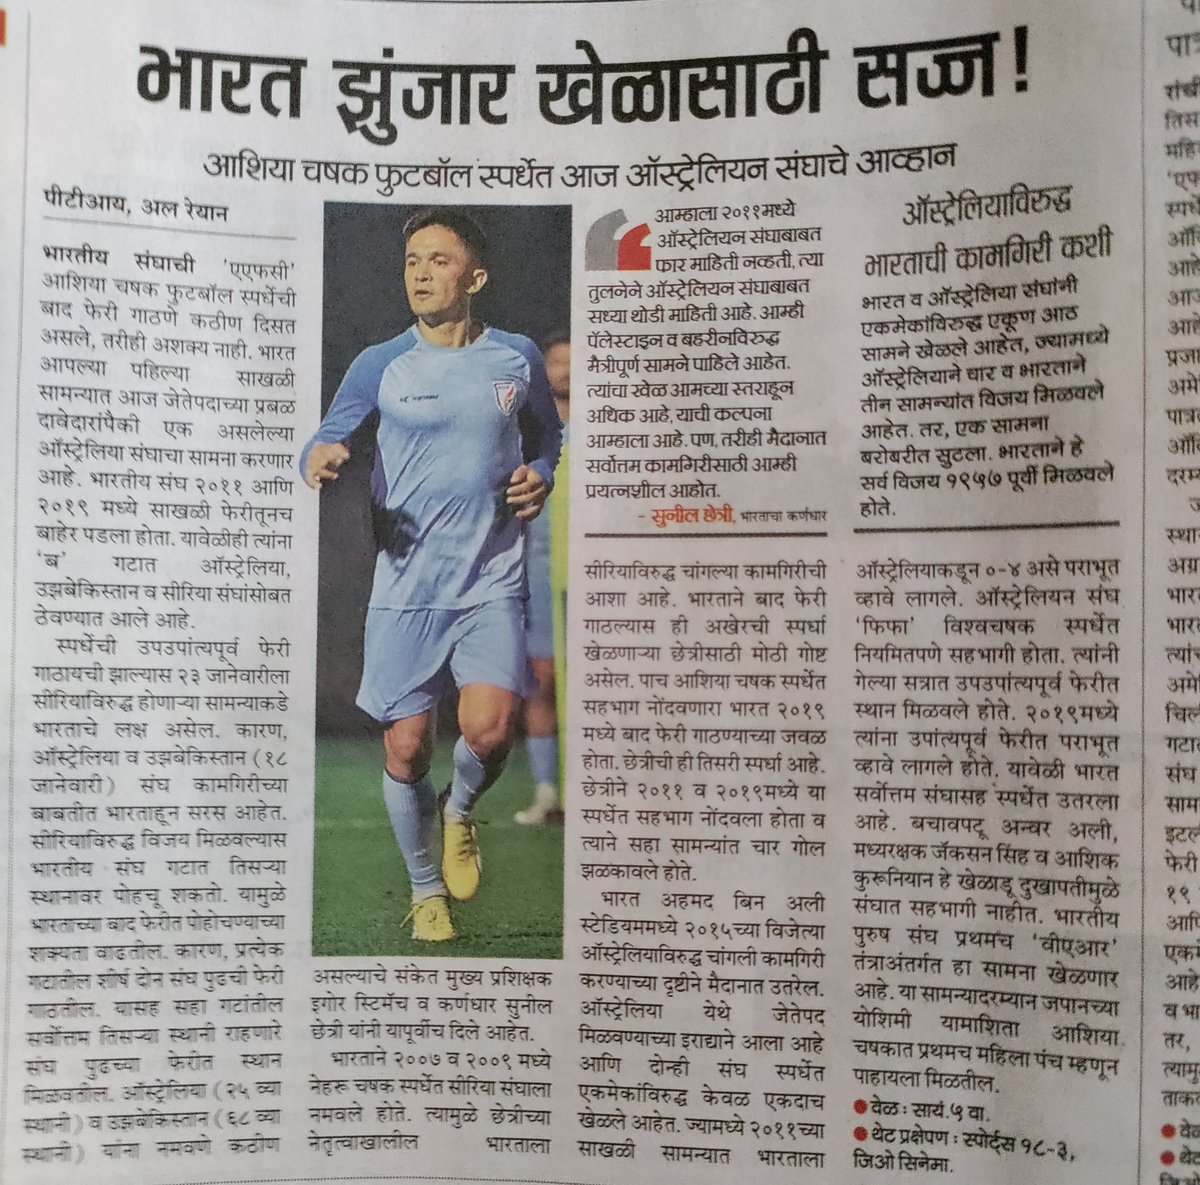 Very very happy to see Marathi newspaper Loksatta mentioning about Indian football for today's match 😍🙌🇮🇳⚽

#IndianFootball #BlueTigersInAsia #AFCAsianCup2023 #HayyaAsia  #asiancup2023 #marathinews